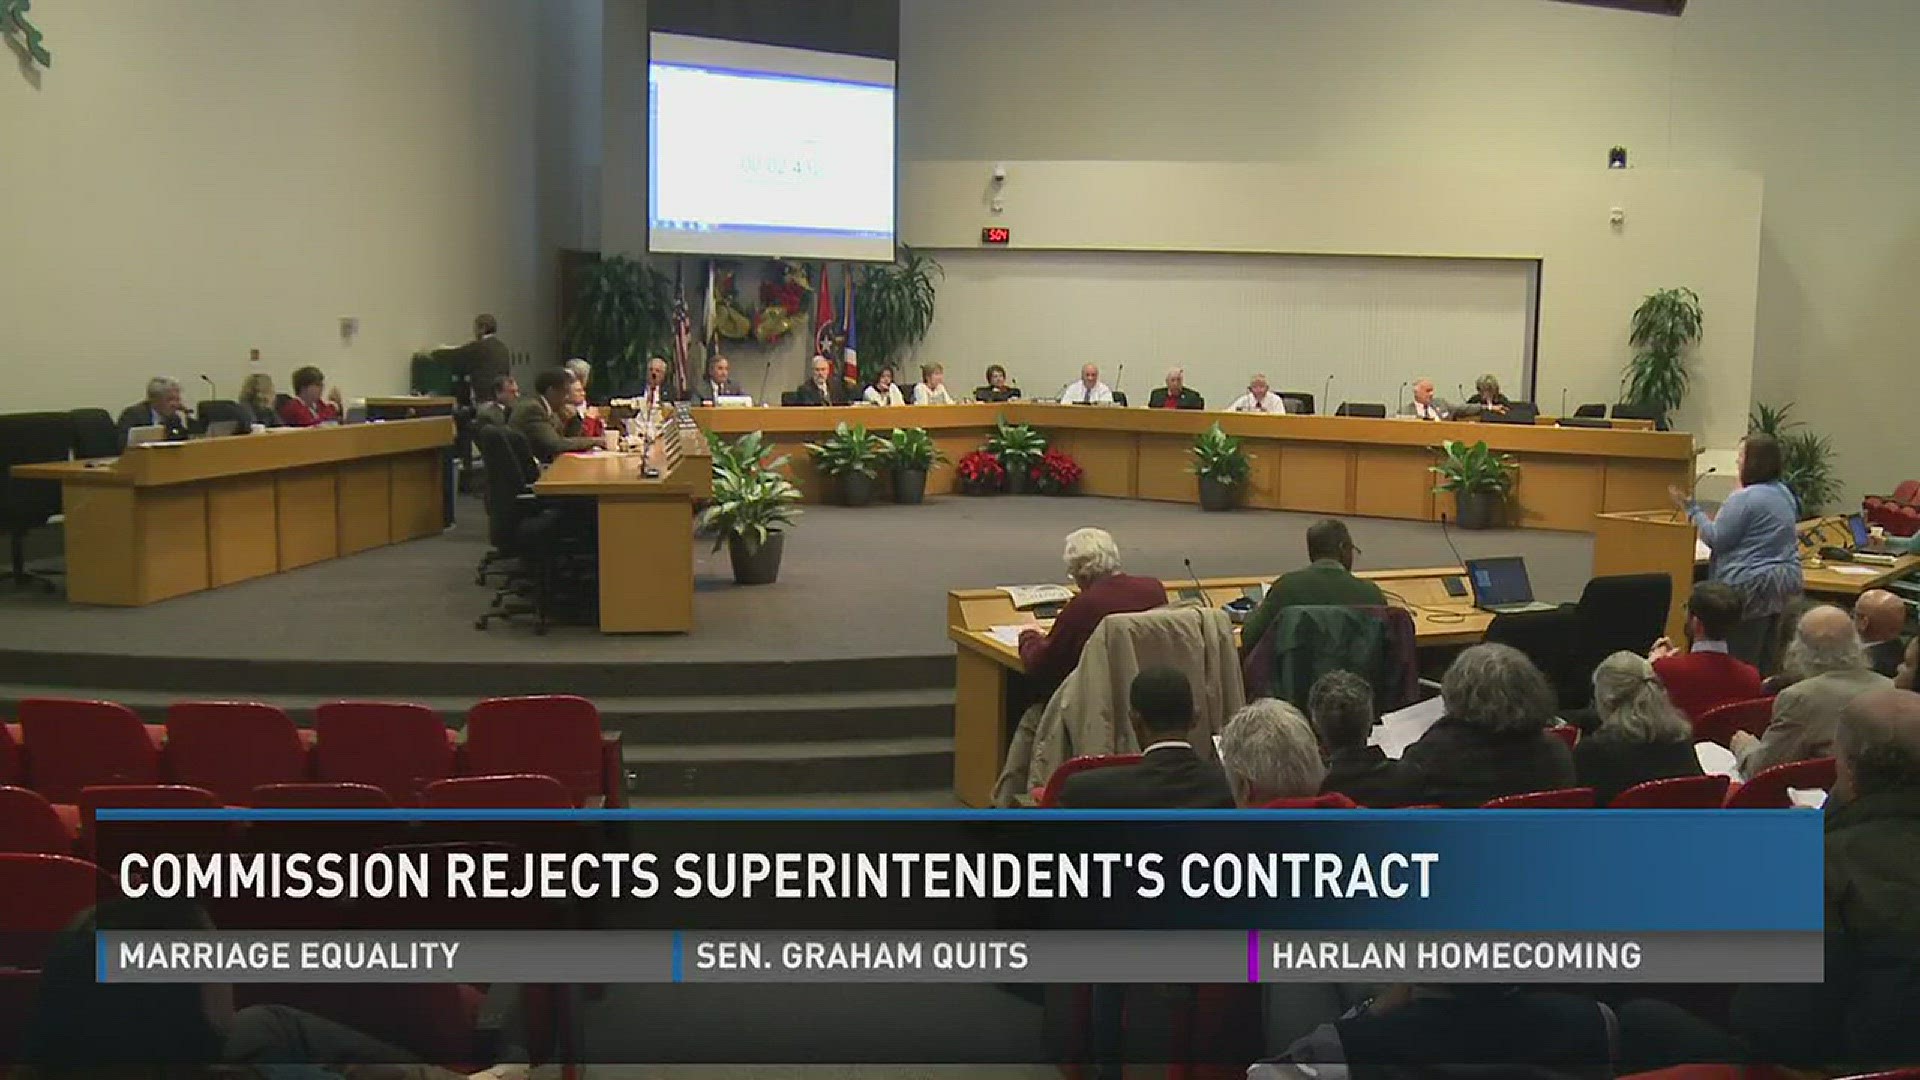 Nine of 11 Knox County commissioners rejected a contract Monday for Knox County Superintendent Jim McIntyre - but their vote has no force. Dec. 21, 2015